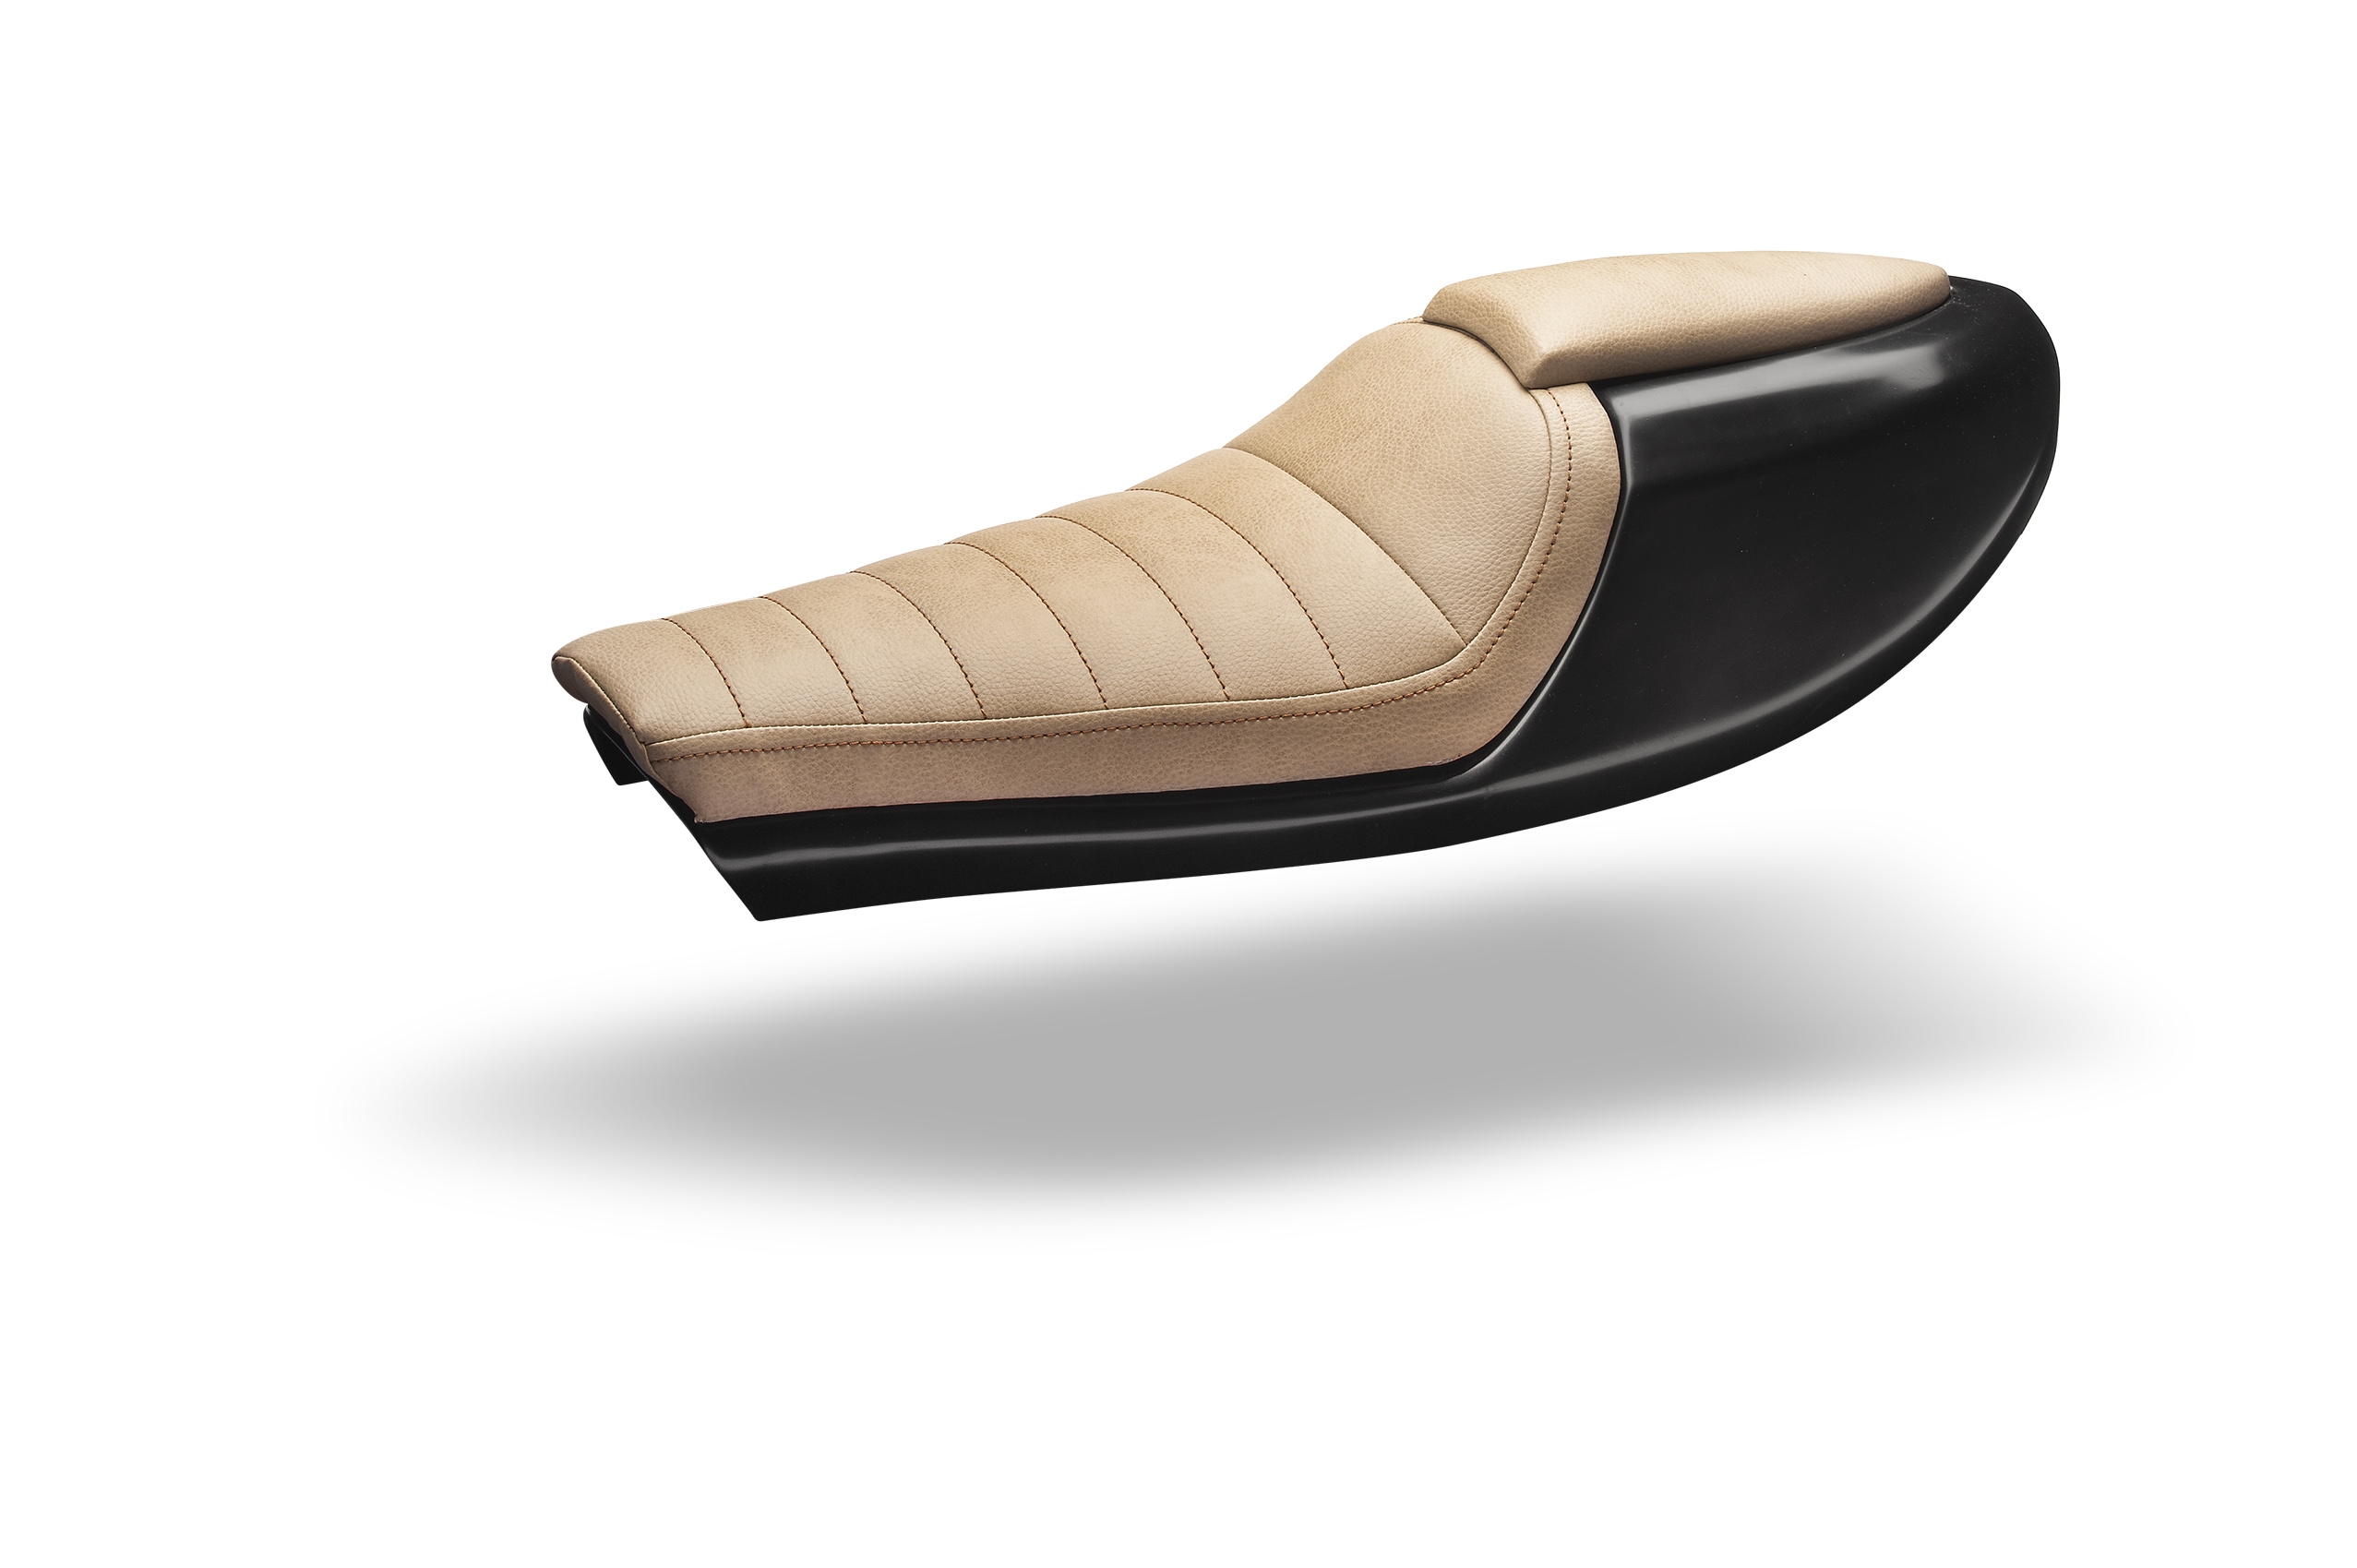 "Neo Classic" Universal Cafe Racer seat (beige)